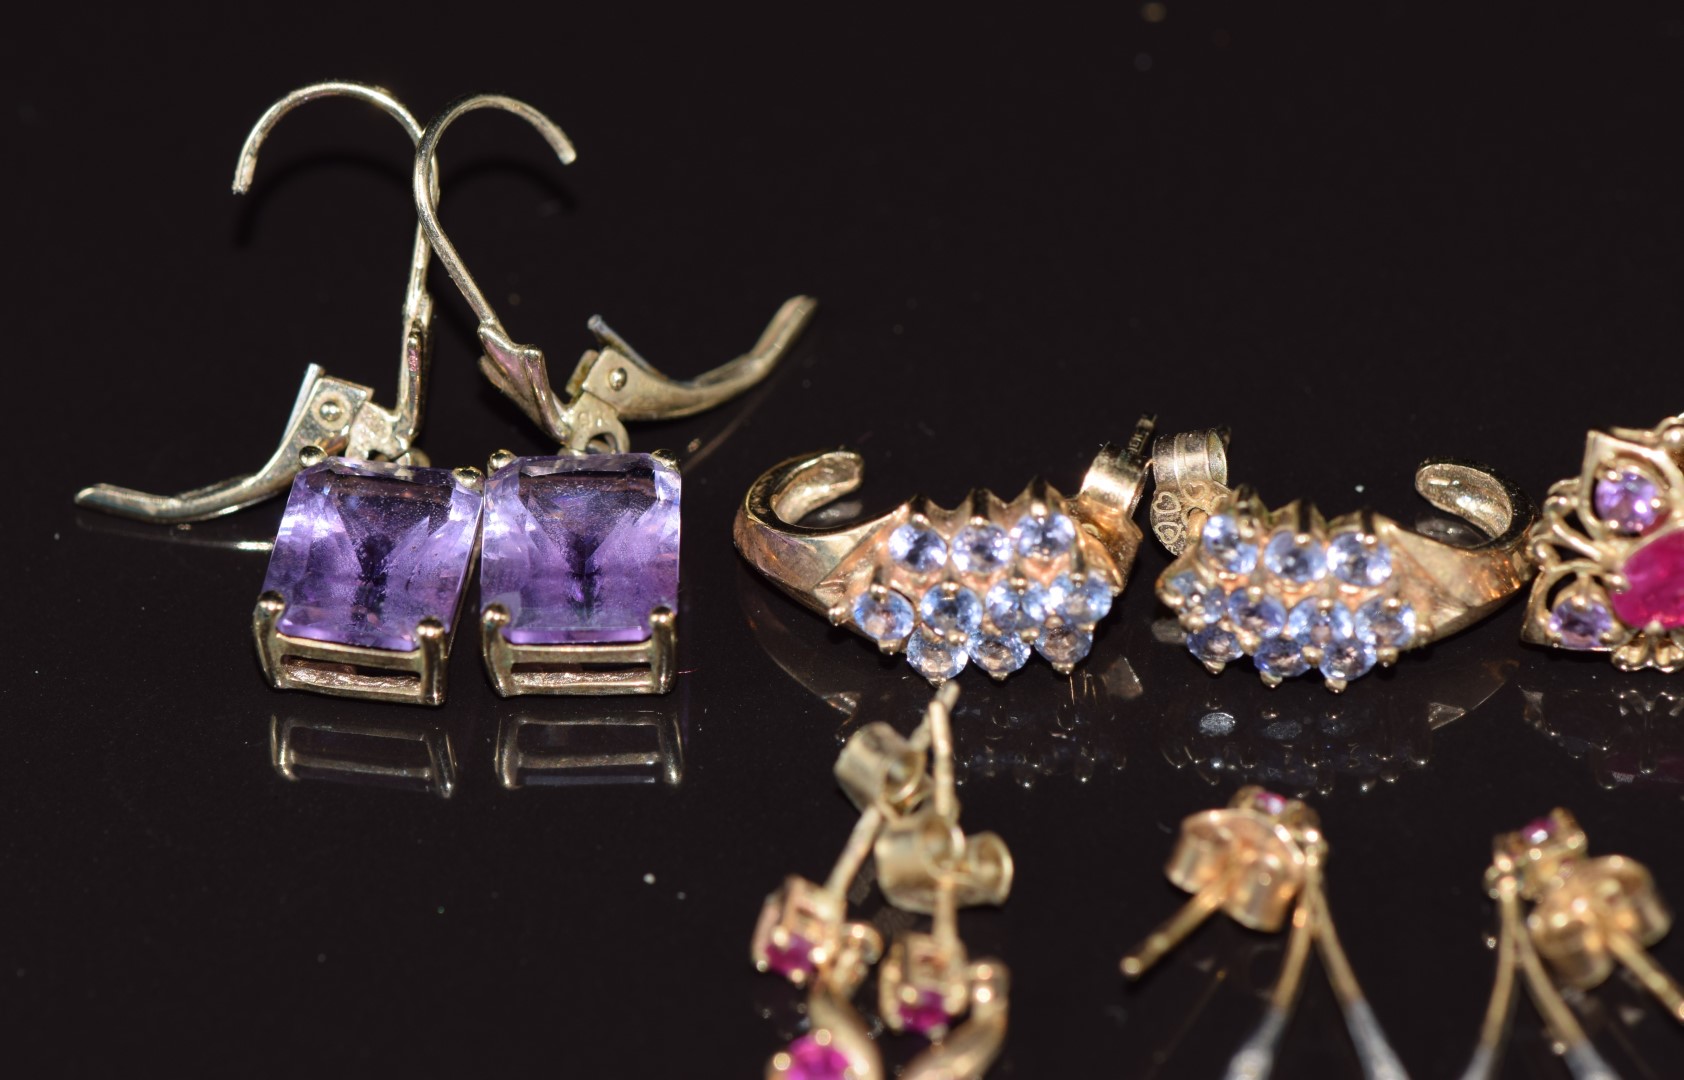 Five pairs of 9ct gold earrings set with amethysts, rubies, and tanzanites, 12.3g - Image 3 of 5